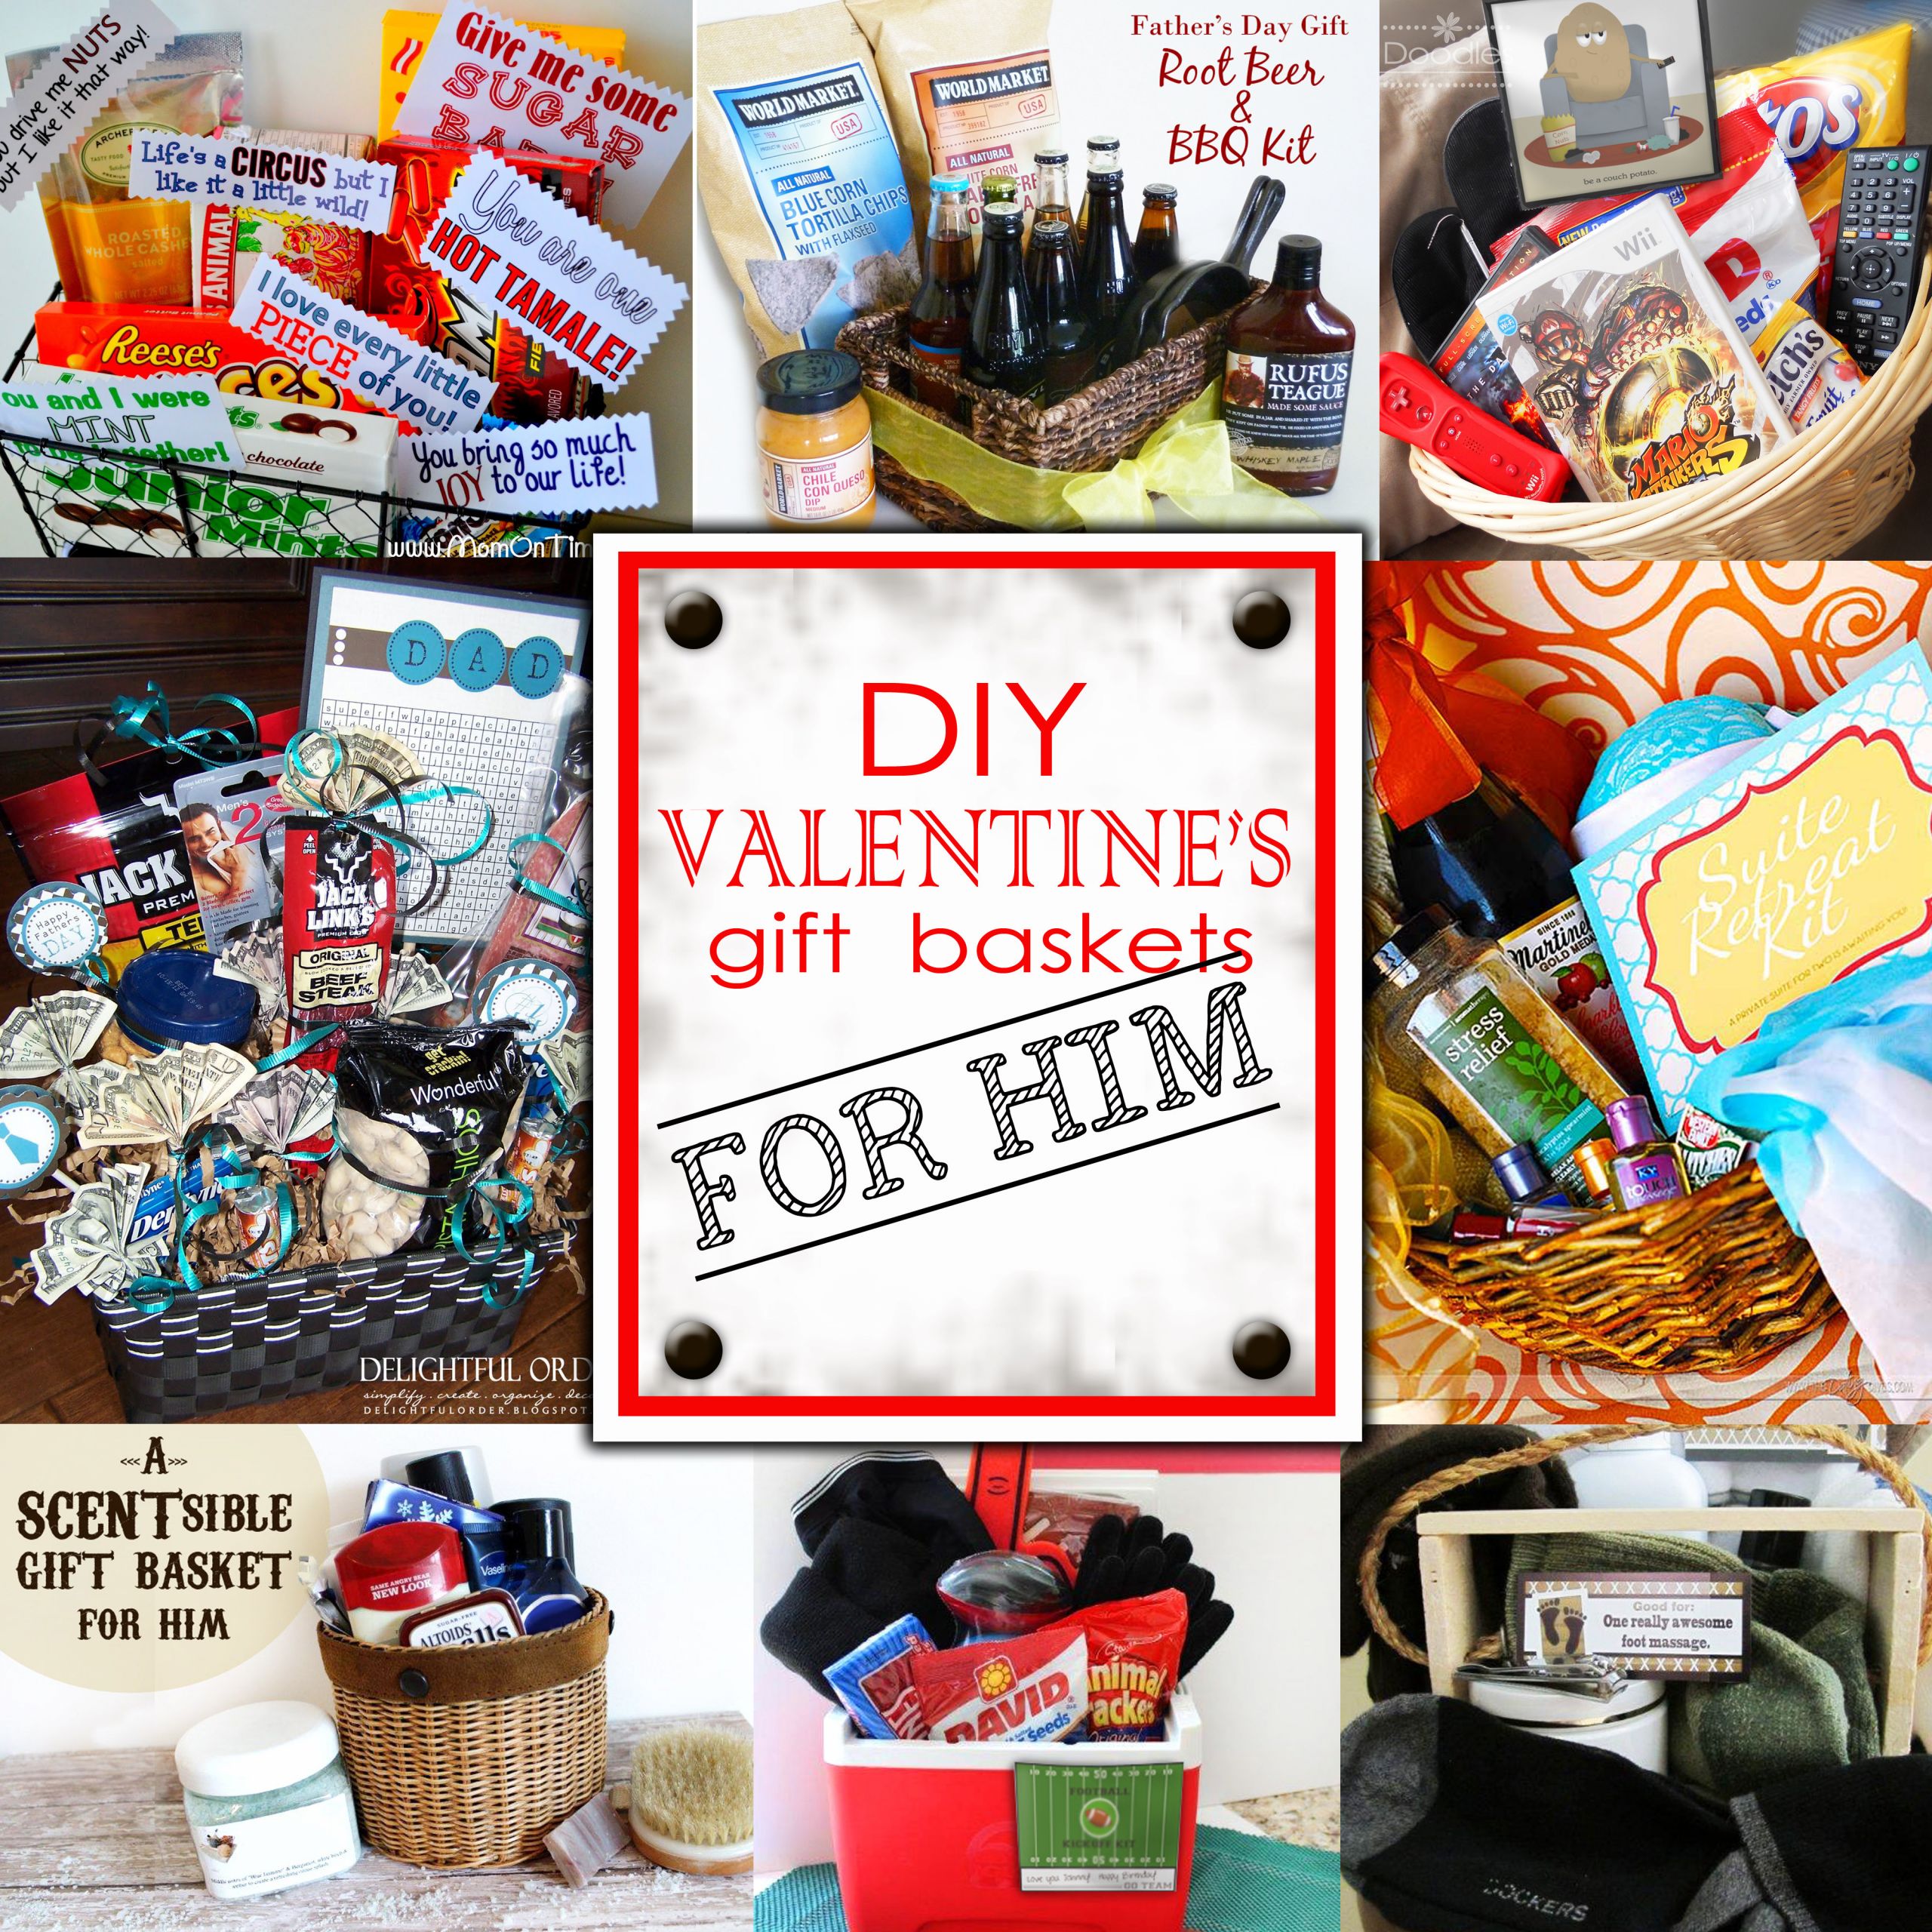 Homemade Valentines Gift Ideas for Him Fresh Diy Valentine S Day Gift Baskets for Him Darling Doodles